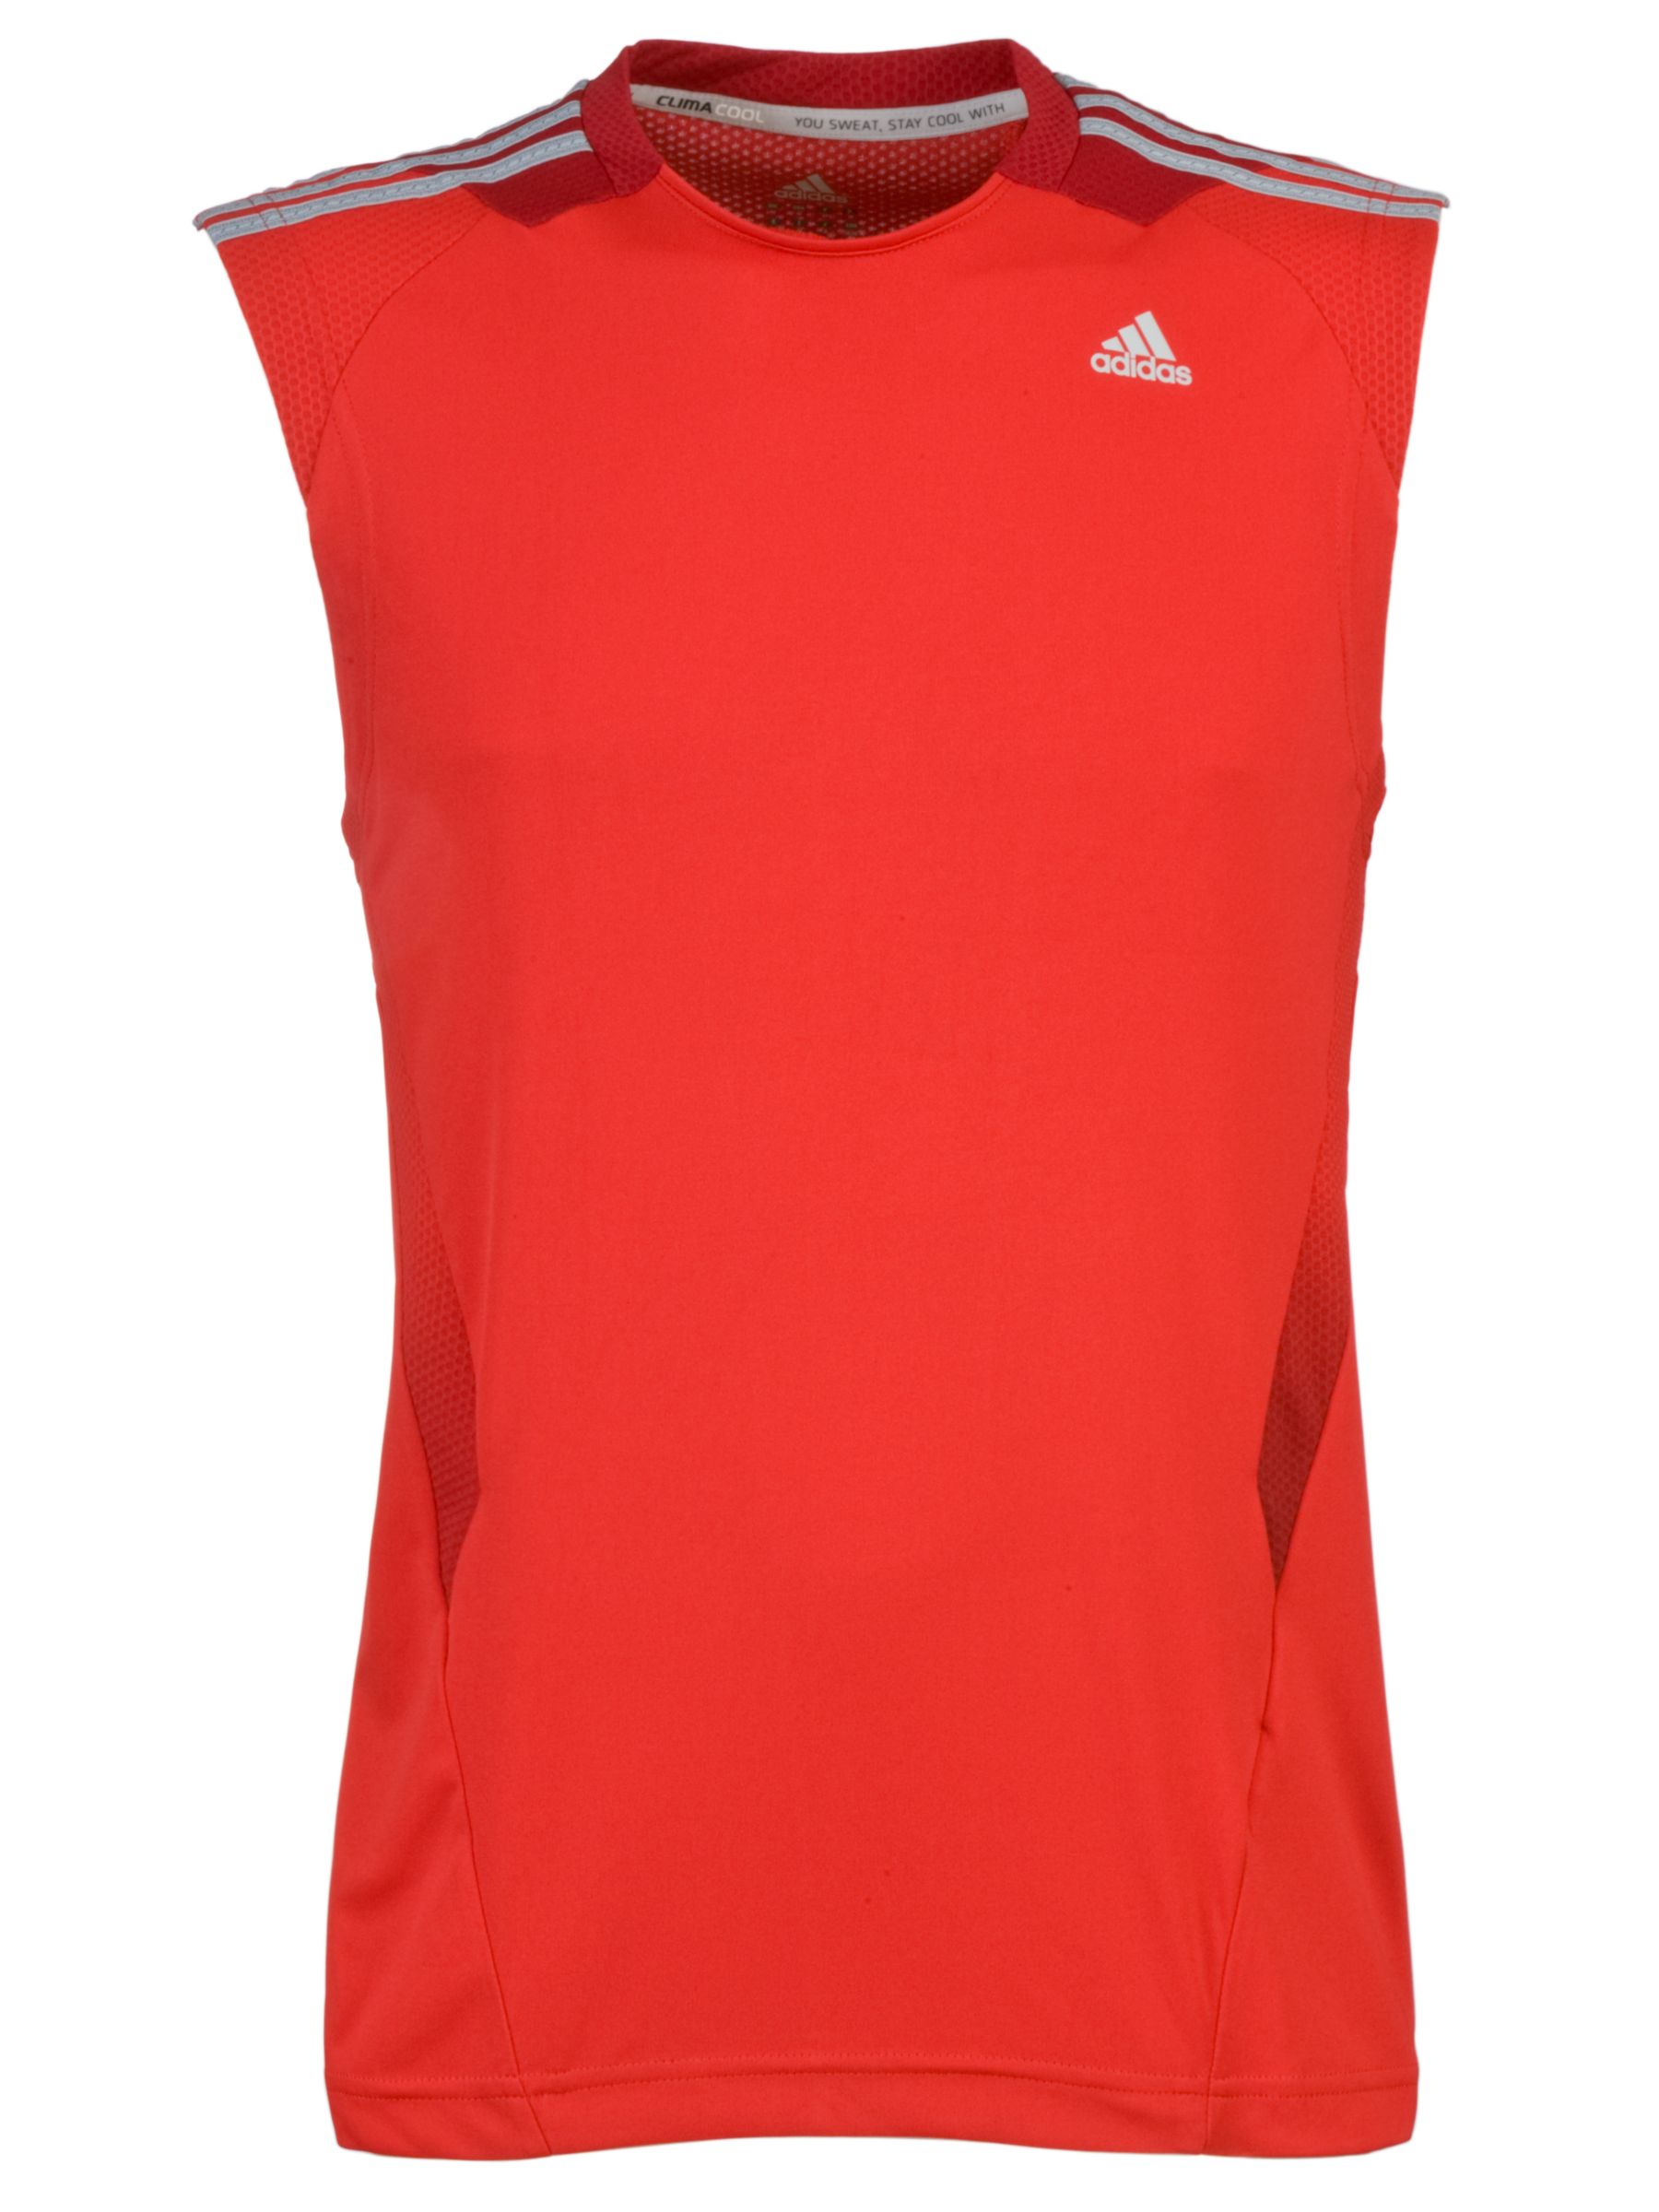 Adidas Clima365 Sleeveless T-Shirt, Red/Strong red